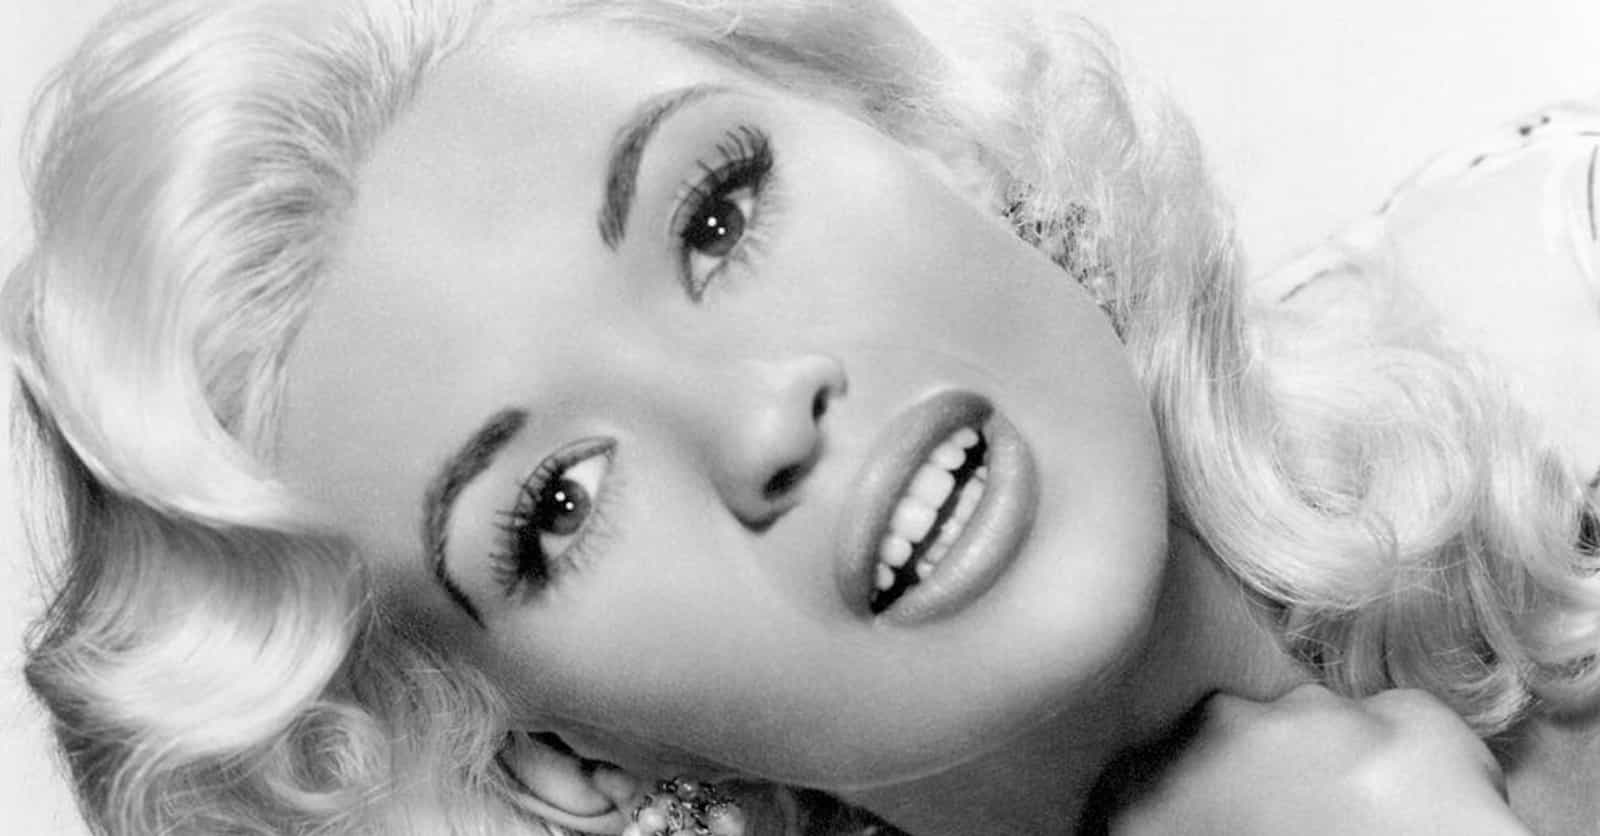 From Bombshell Bigger Than Marilyn To A Tragic End At 34, The Rise And Fall Of Jayne Mansfield